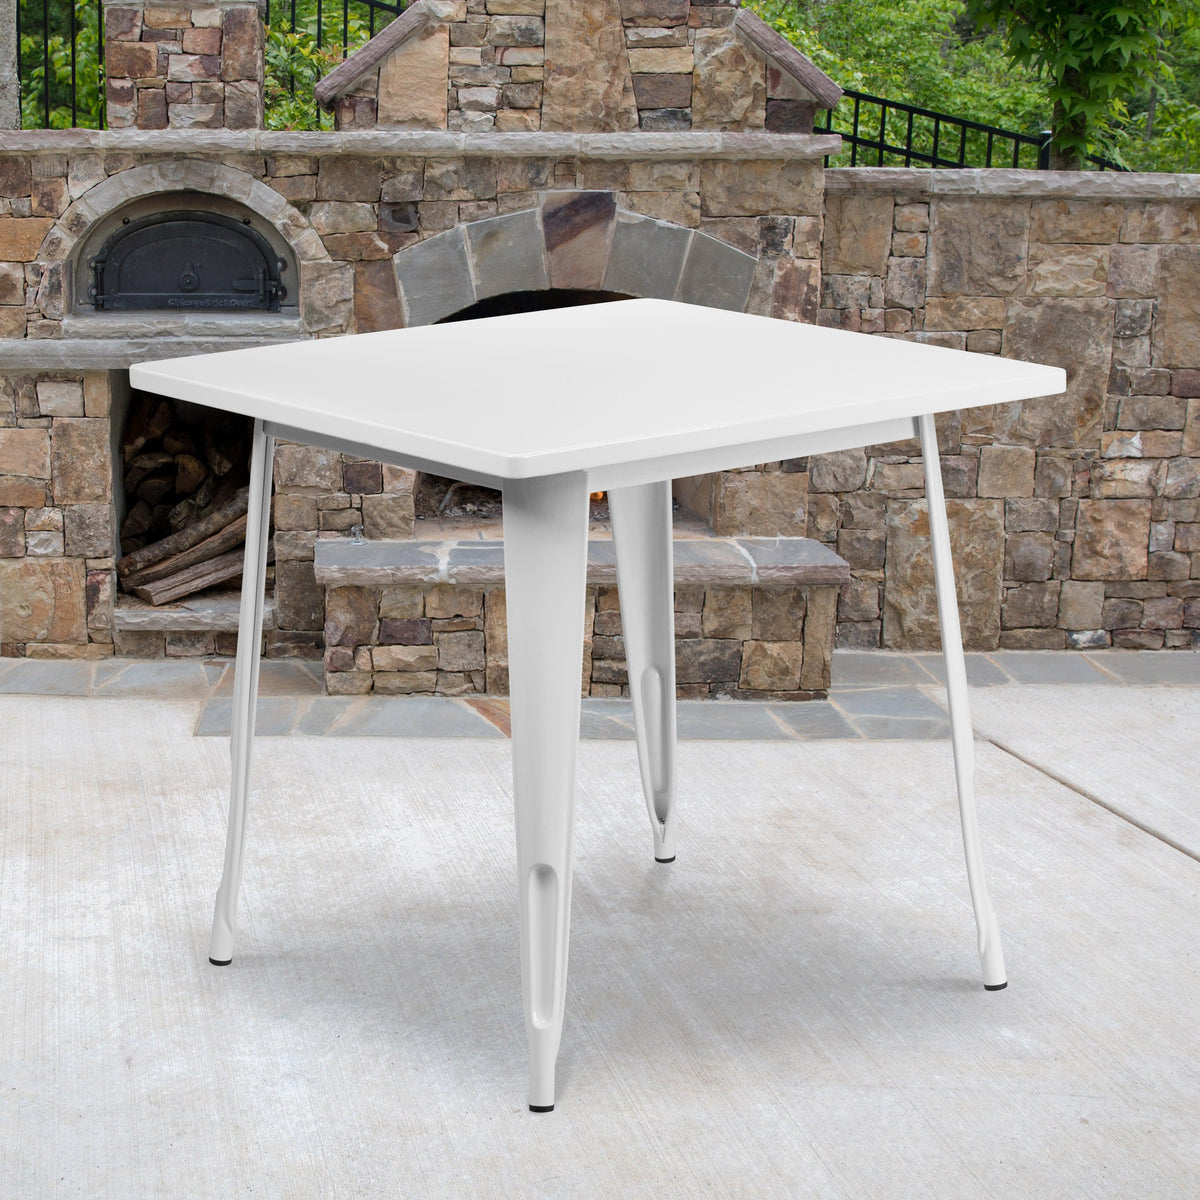 White |#| 31.5inch Square White Metal Indoor-Outdoor Table - Hospitality Furniture